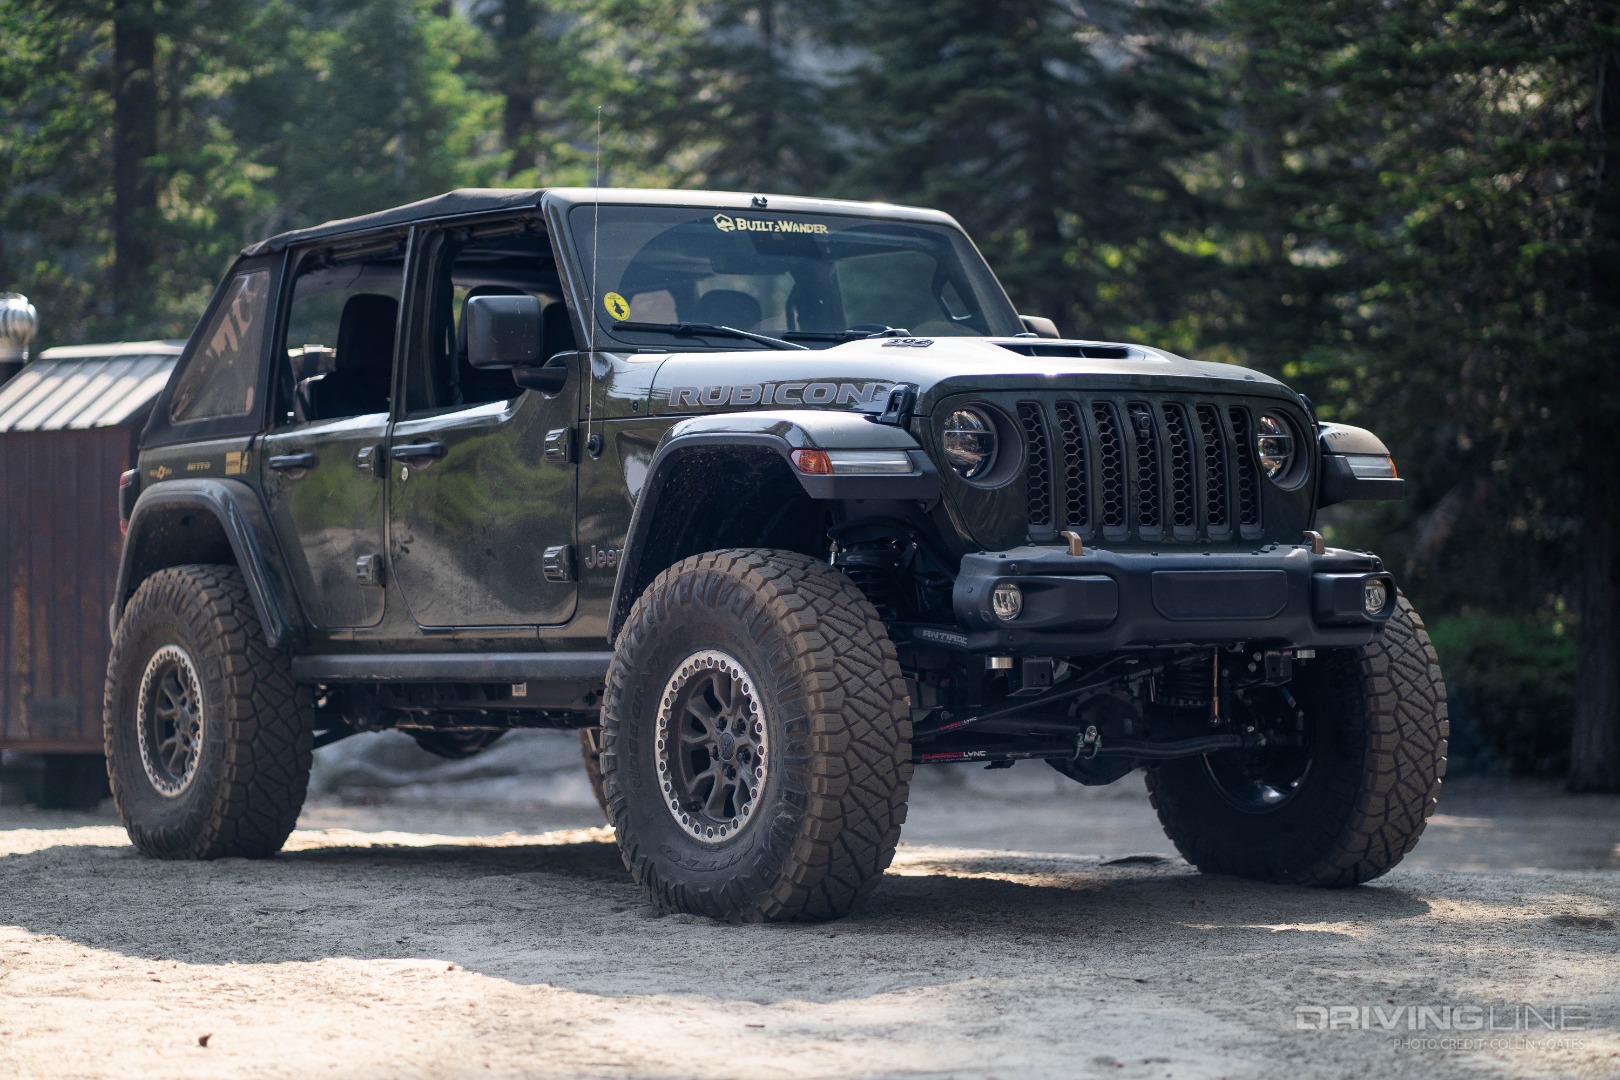 Jeep Wrangler Half-Door Option Available To Order, Starts At $2350 |  